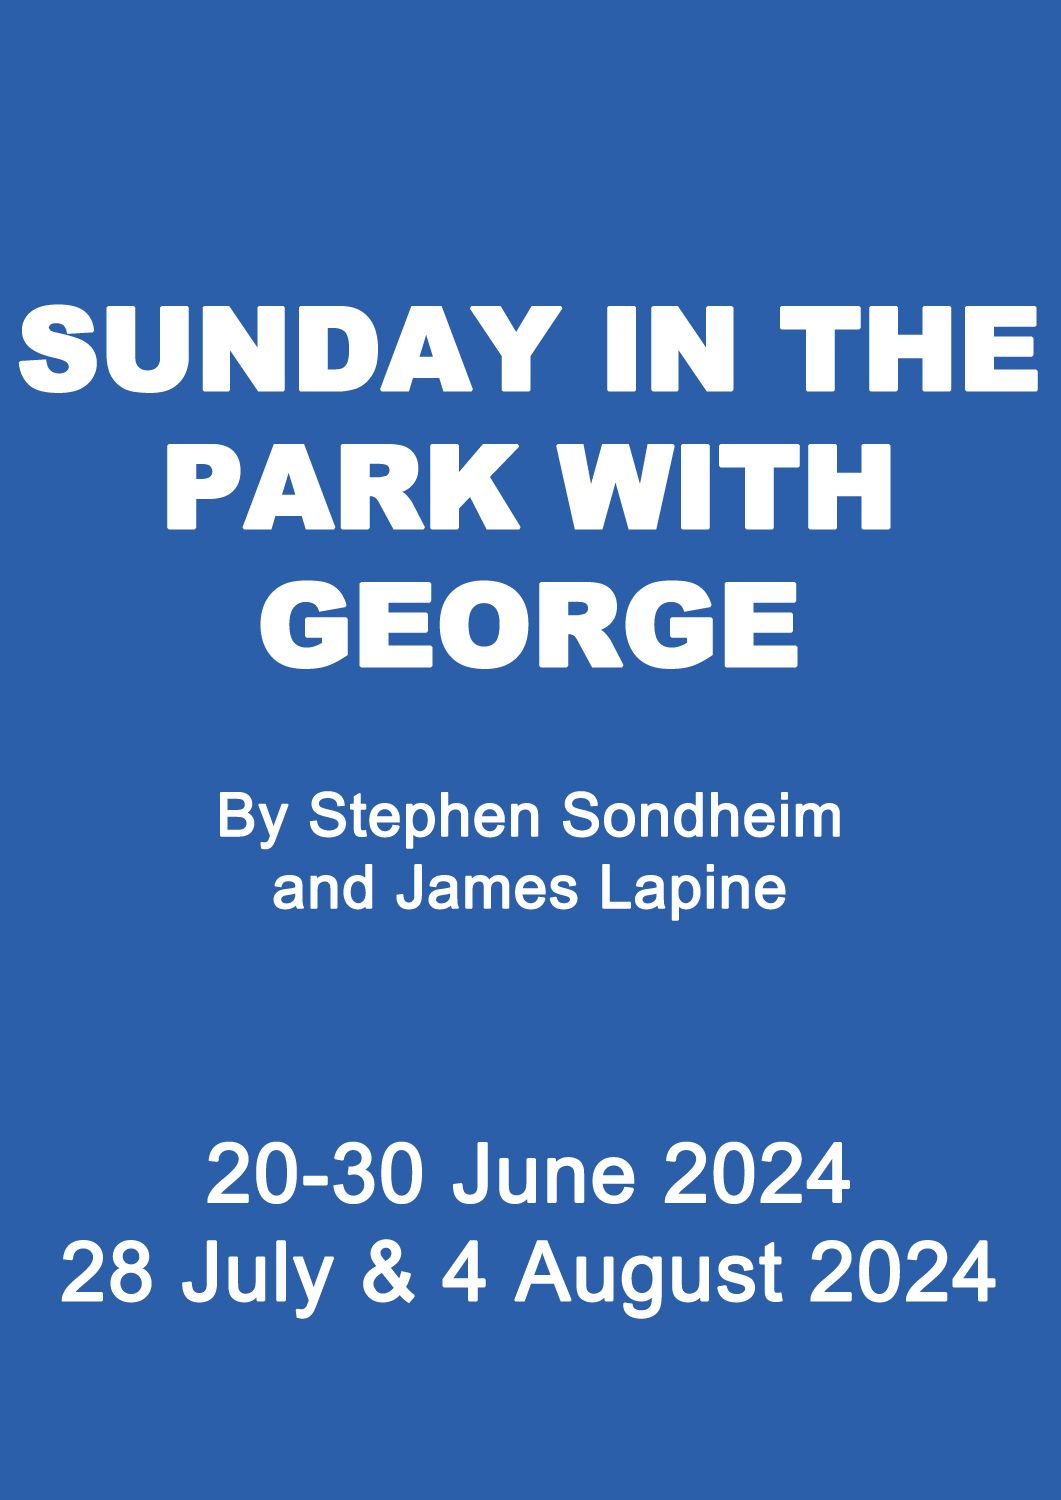 Sunday In The Park With George flyer image